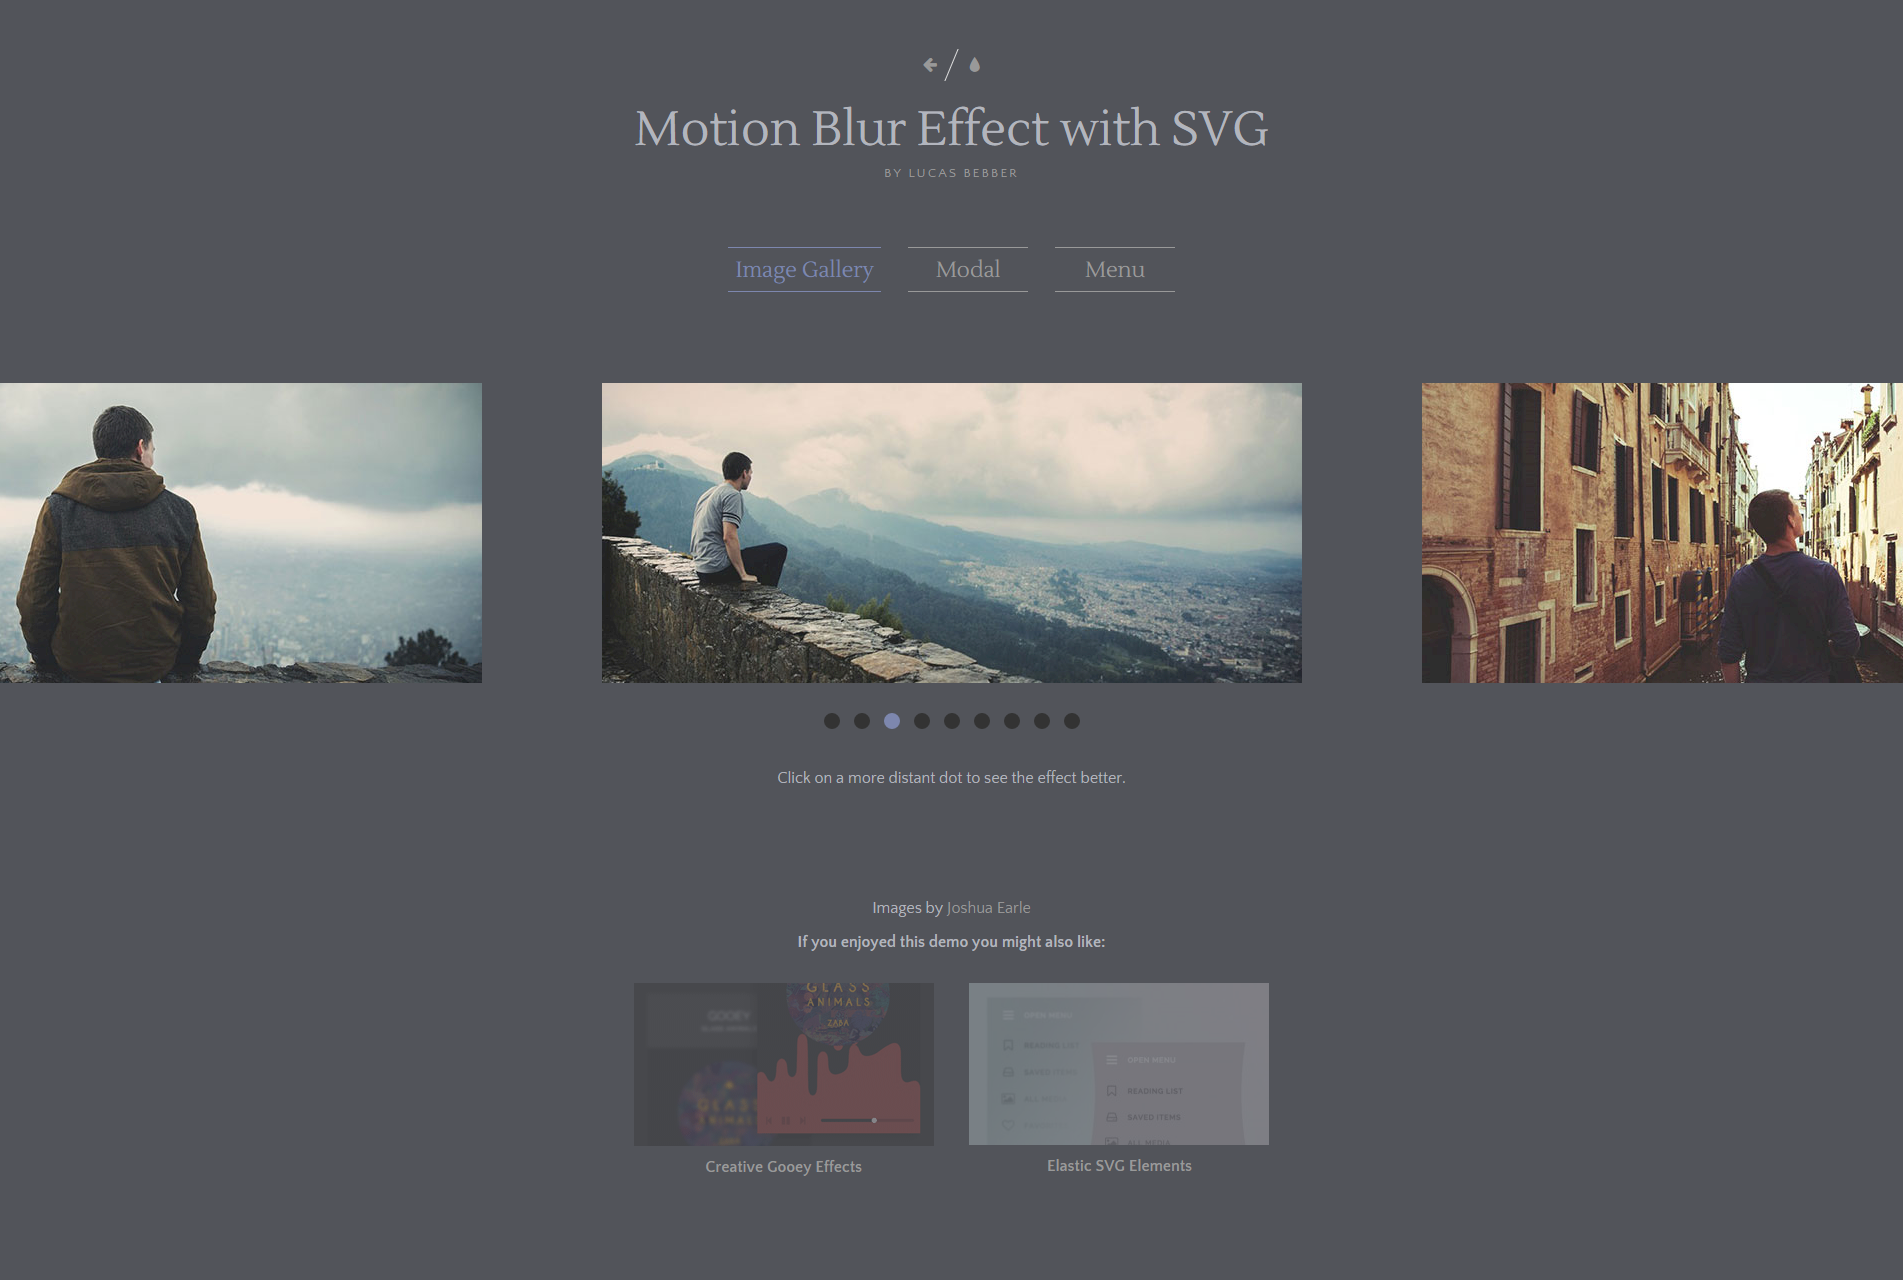 Motion Blur Effect with SVG   Image Gallery